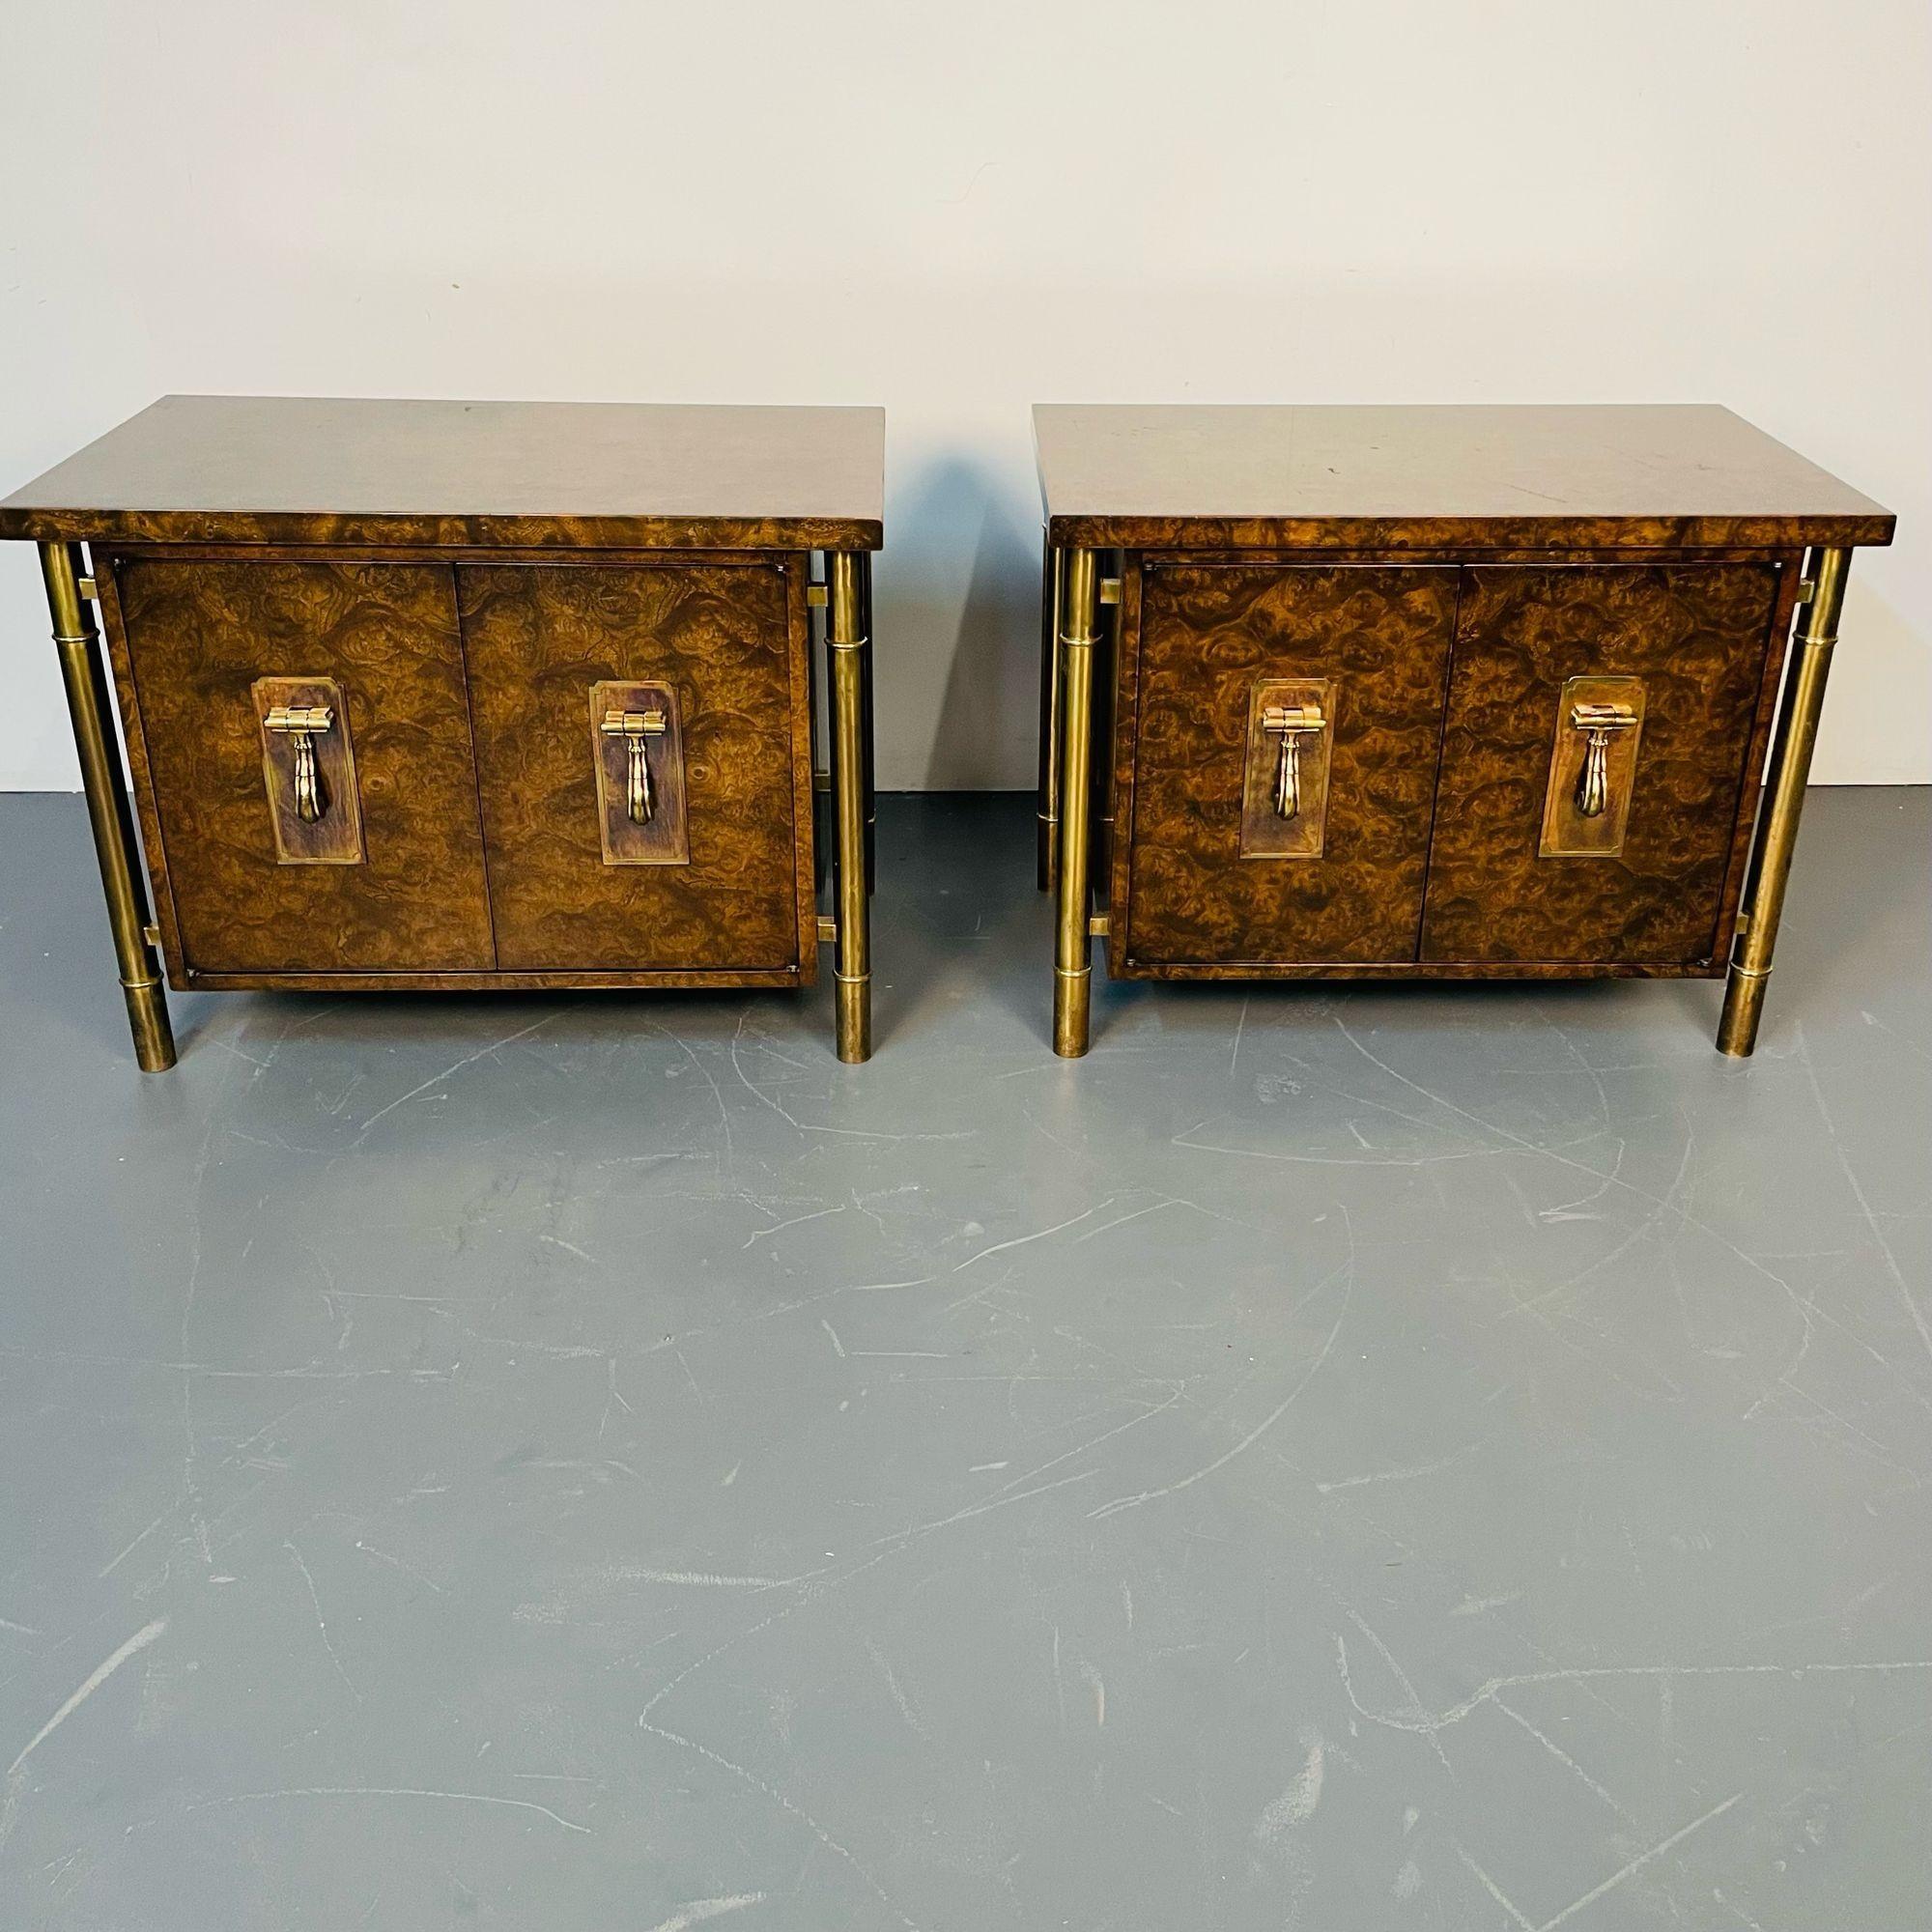 Pair Mid-Century Modern mastercraft nightstands, floating cabinets in Elm, Brass
 
Spectacular pair of nightstands by William Doezema for Mastercraft circa 1960s. The cabinets are comprised of a beautiful Carpathian elm with original brass